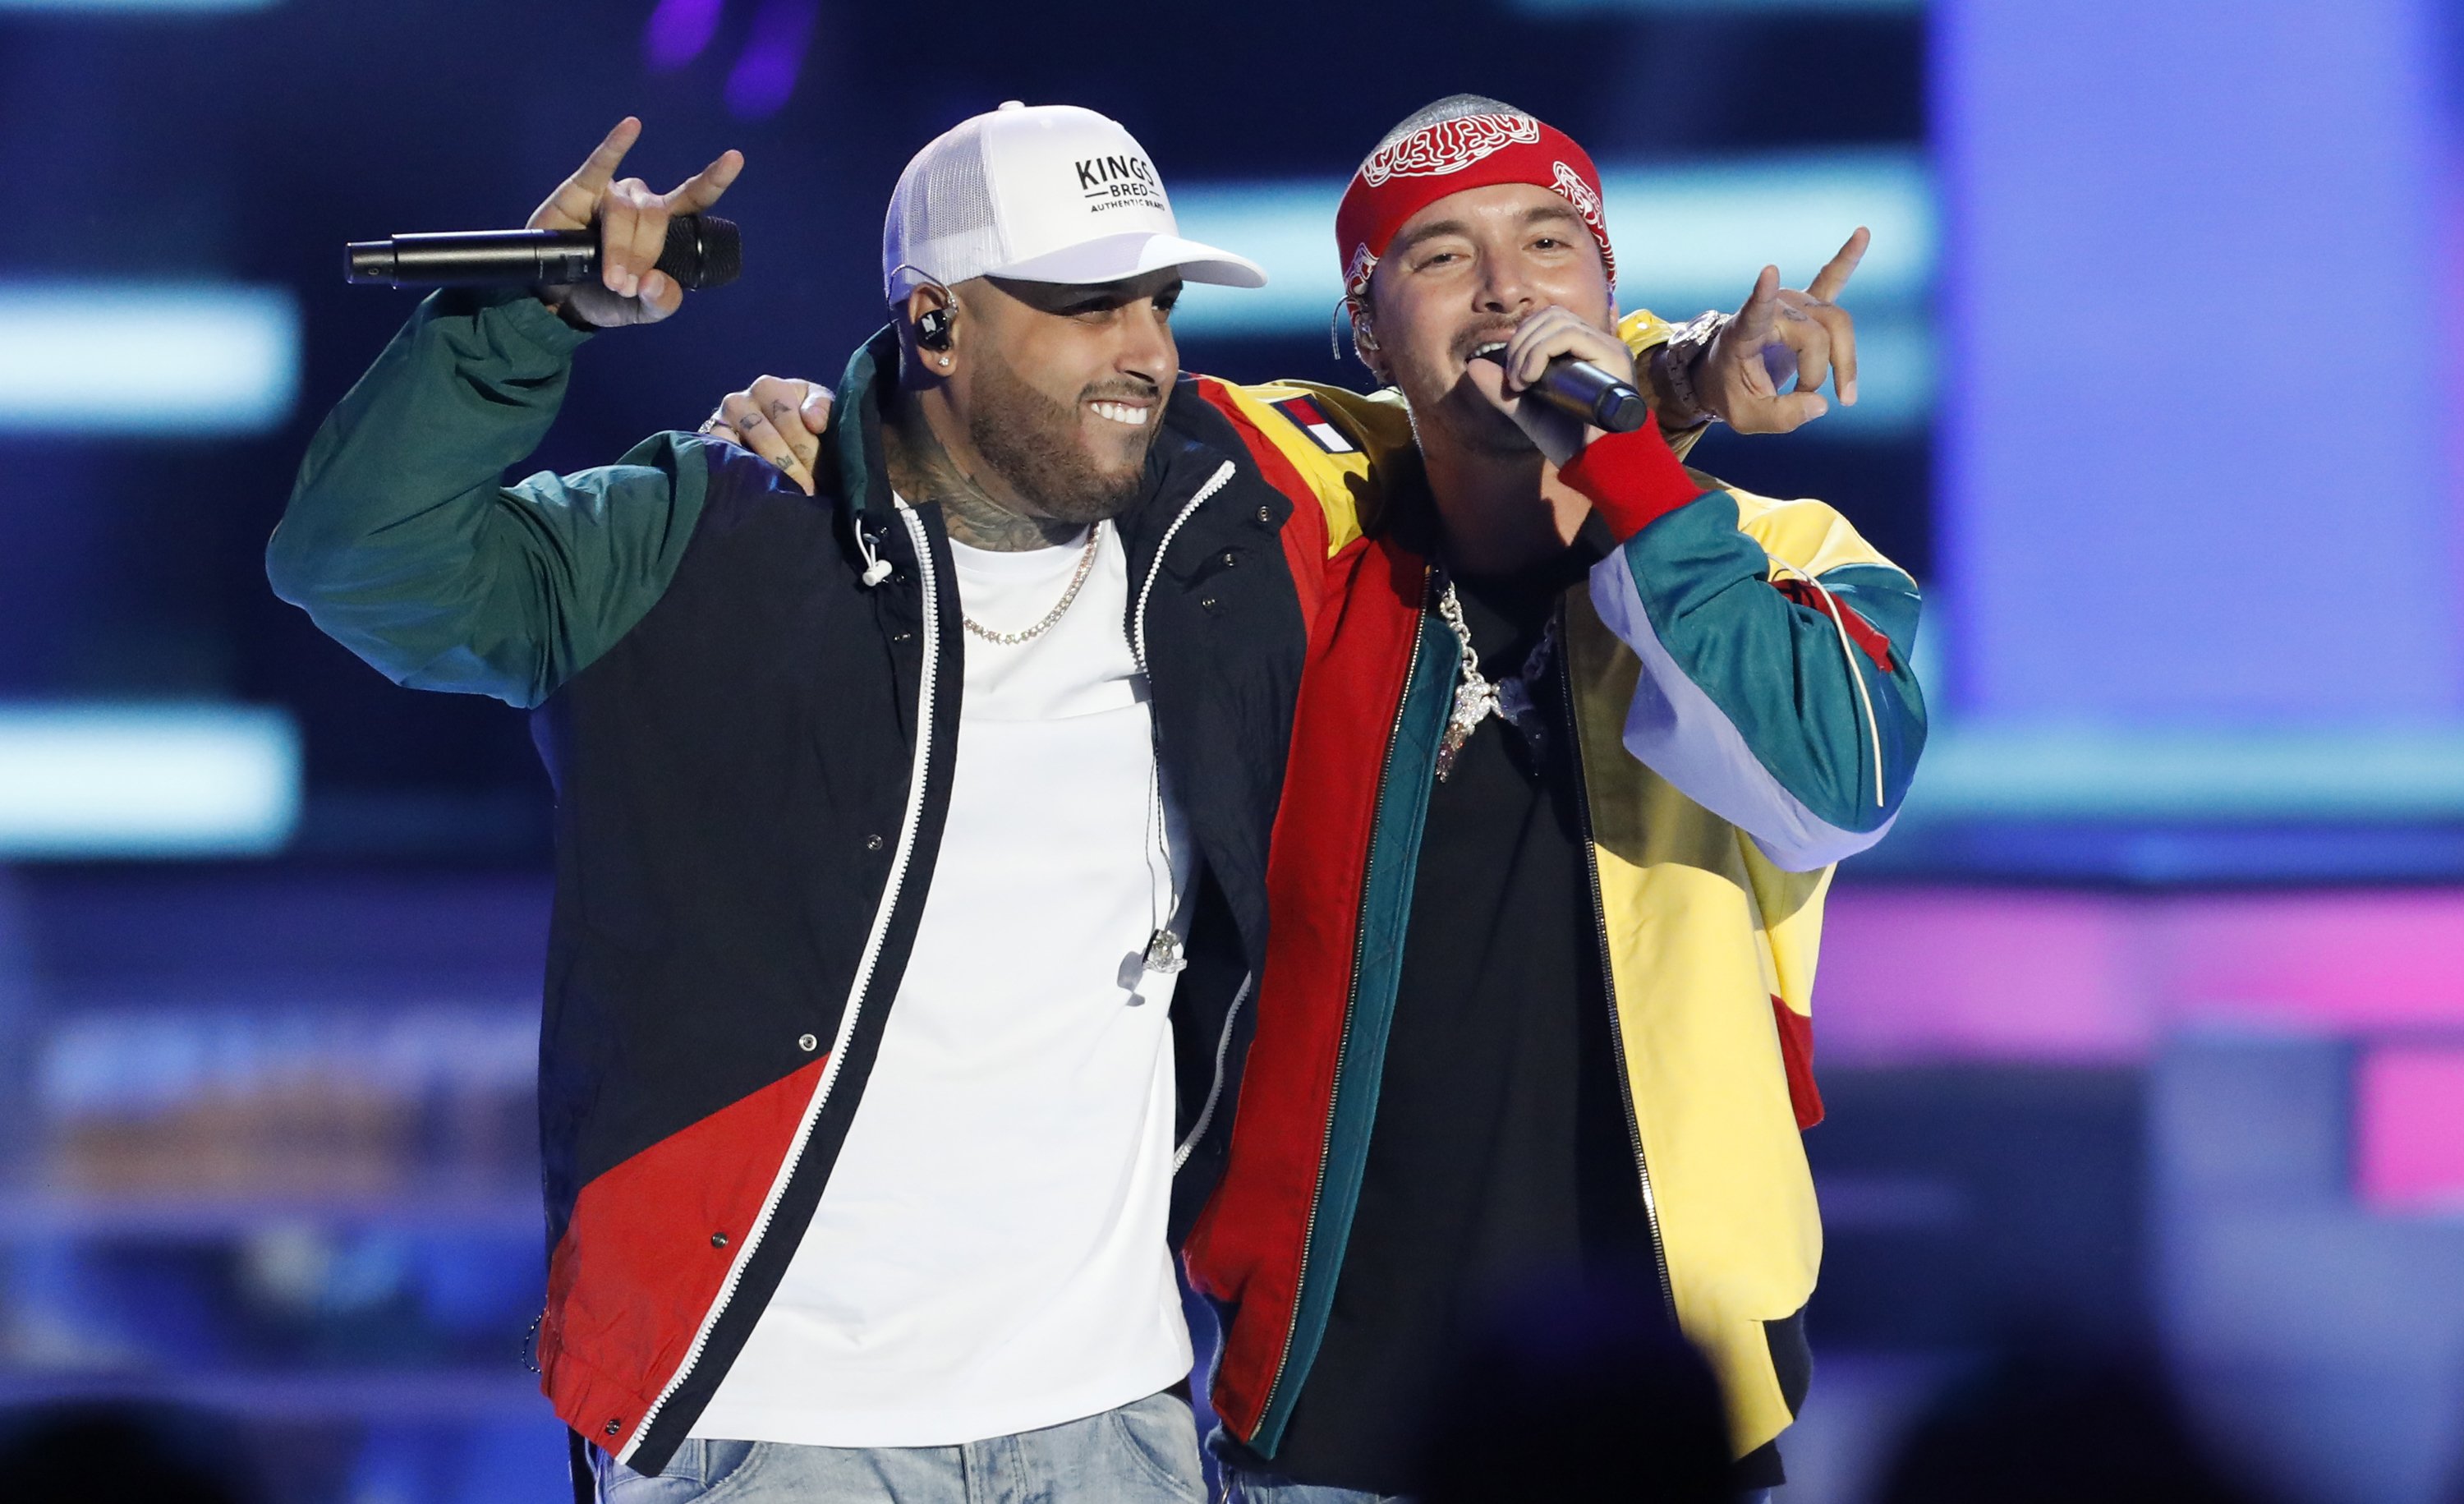 AP names Nicky Jam and J Balvin's 'X' its top song of 2018 | AP News